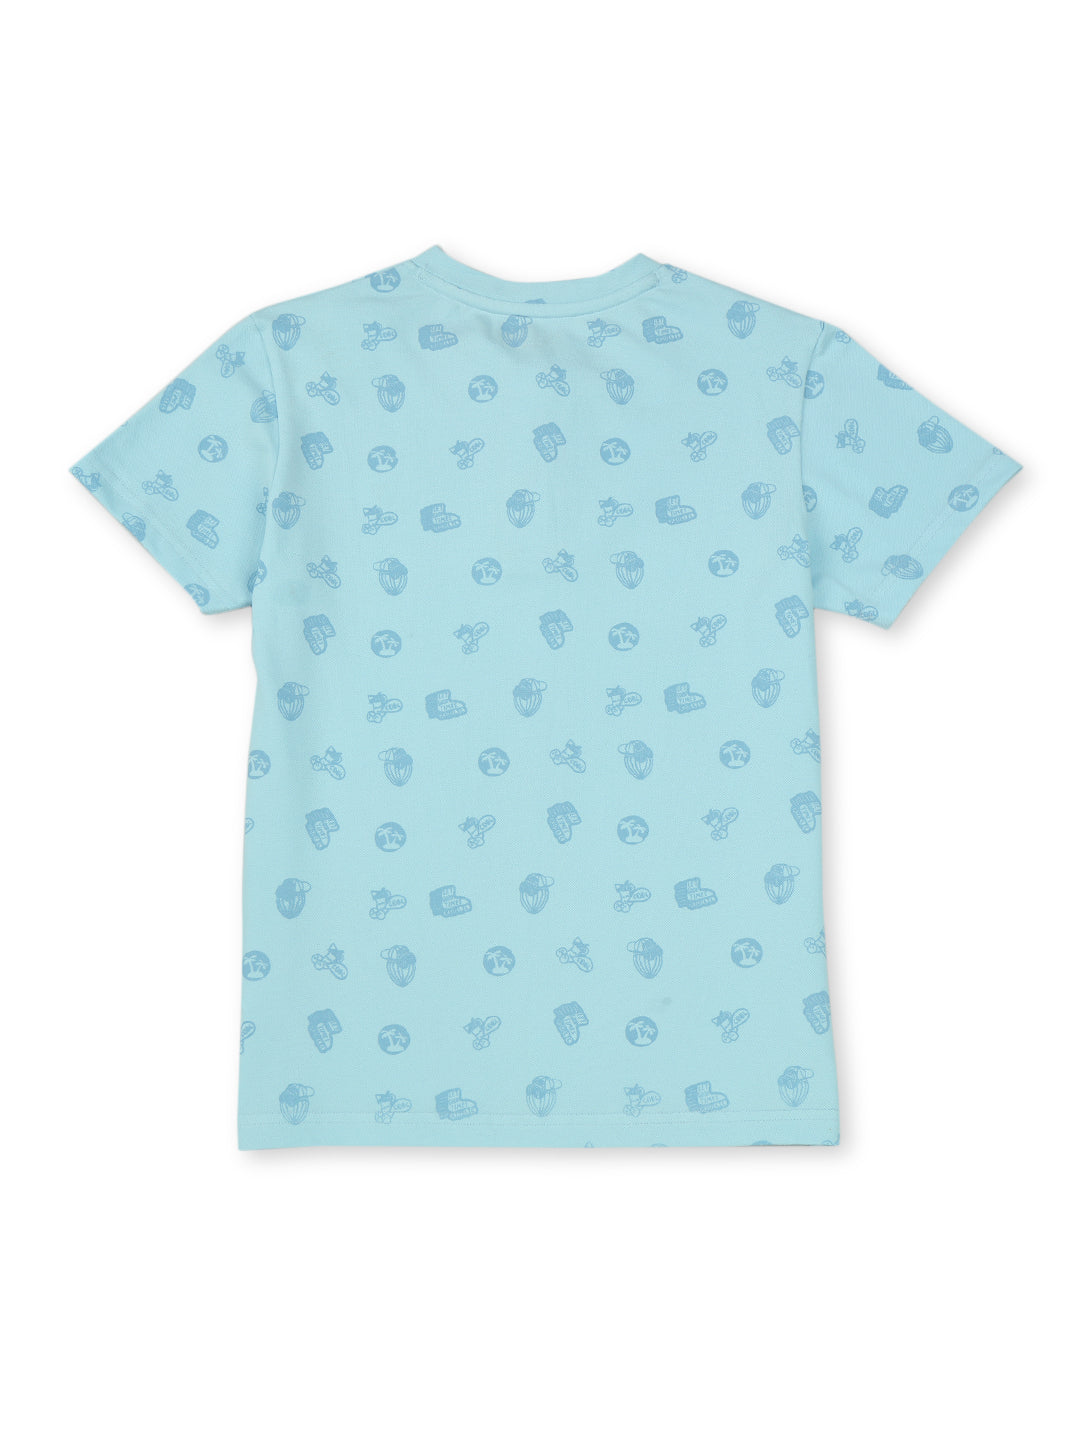 Boys Turquoise Cotton Printed T-Shirt